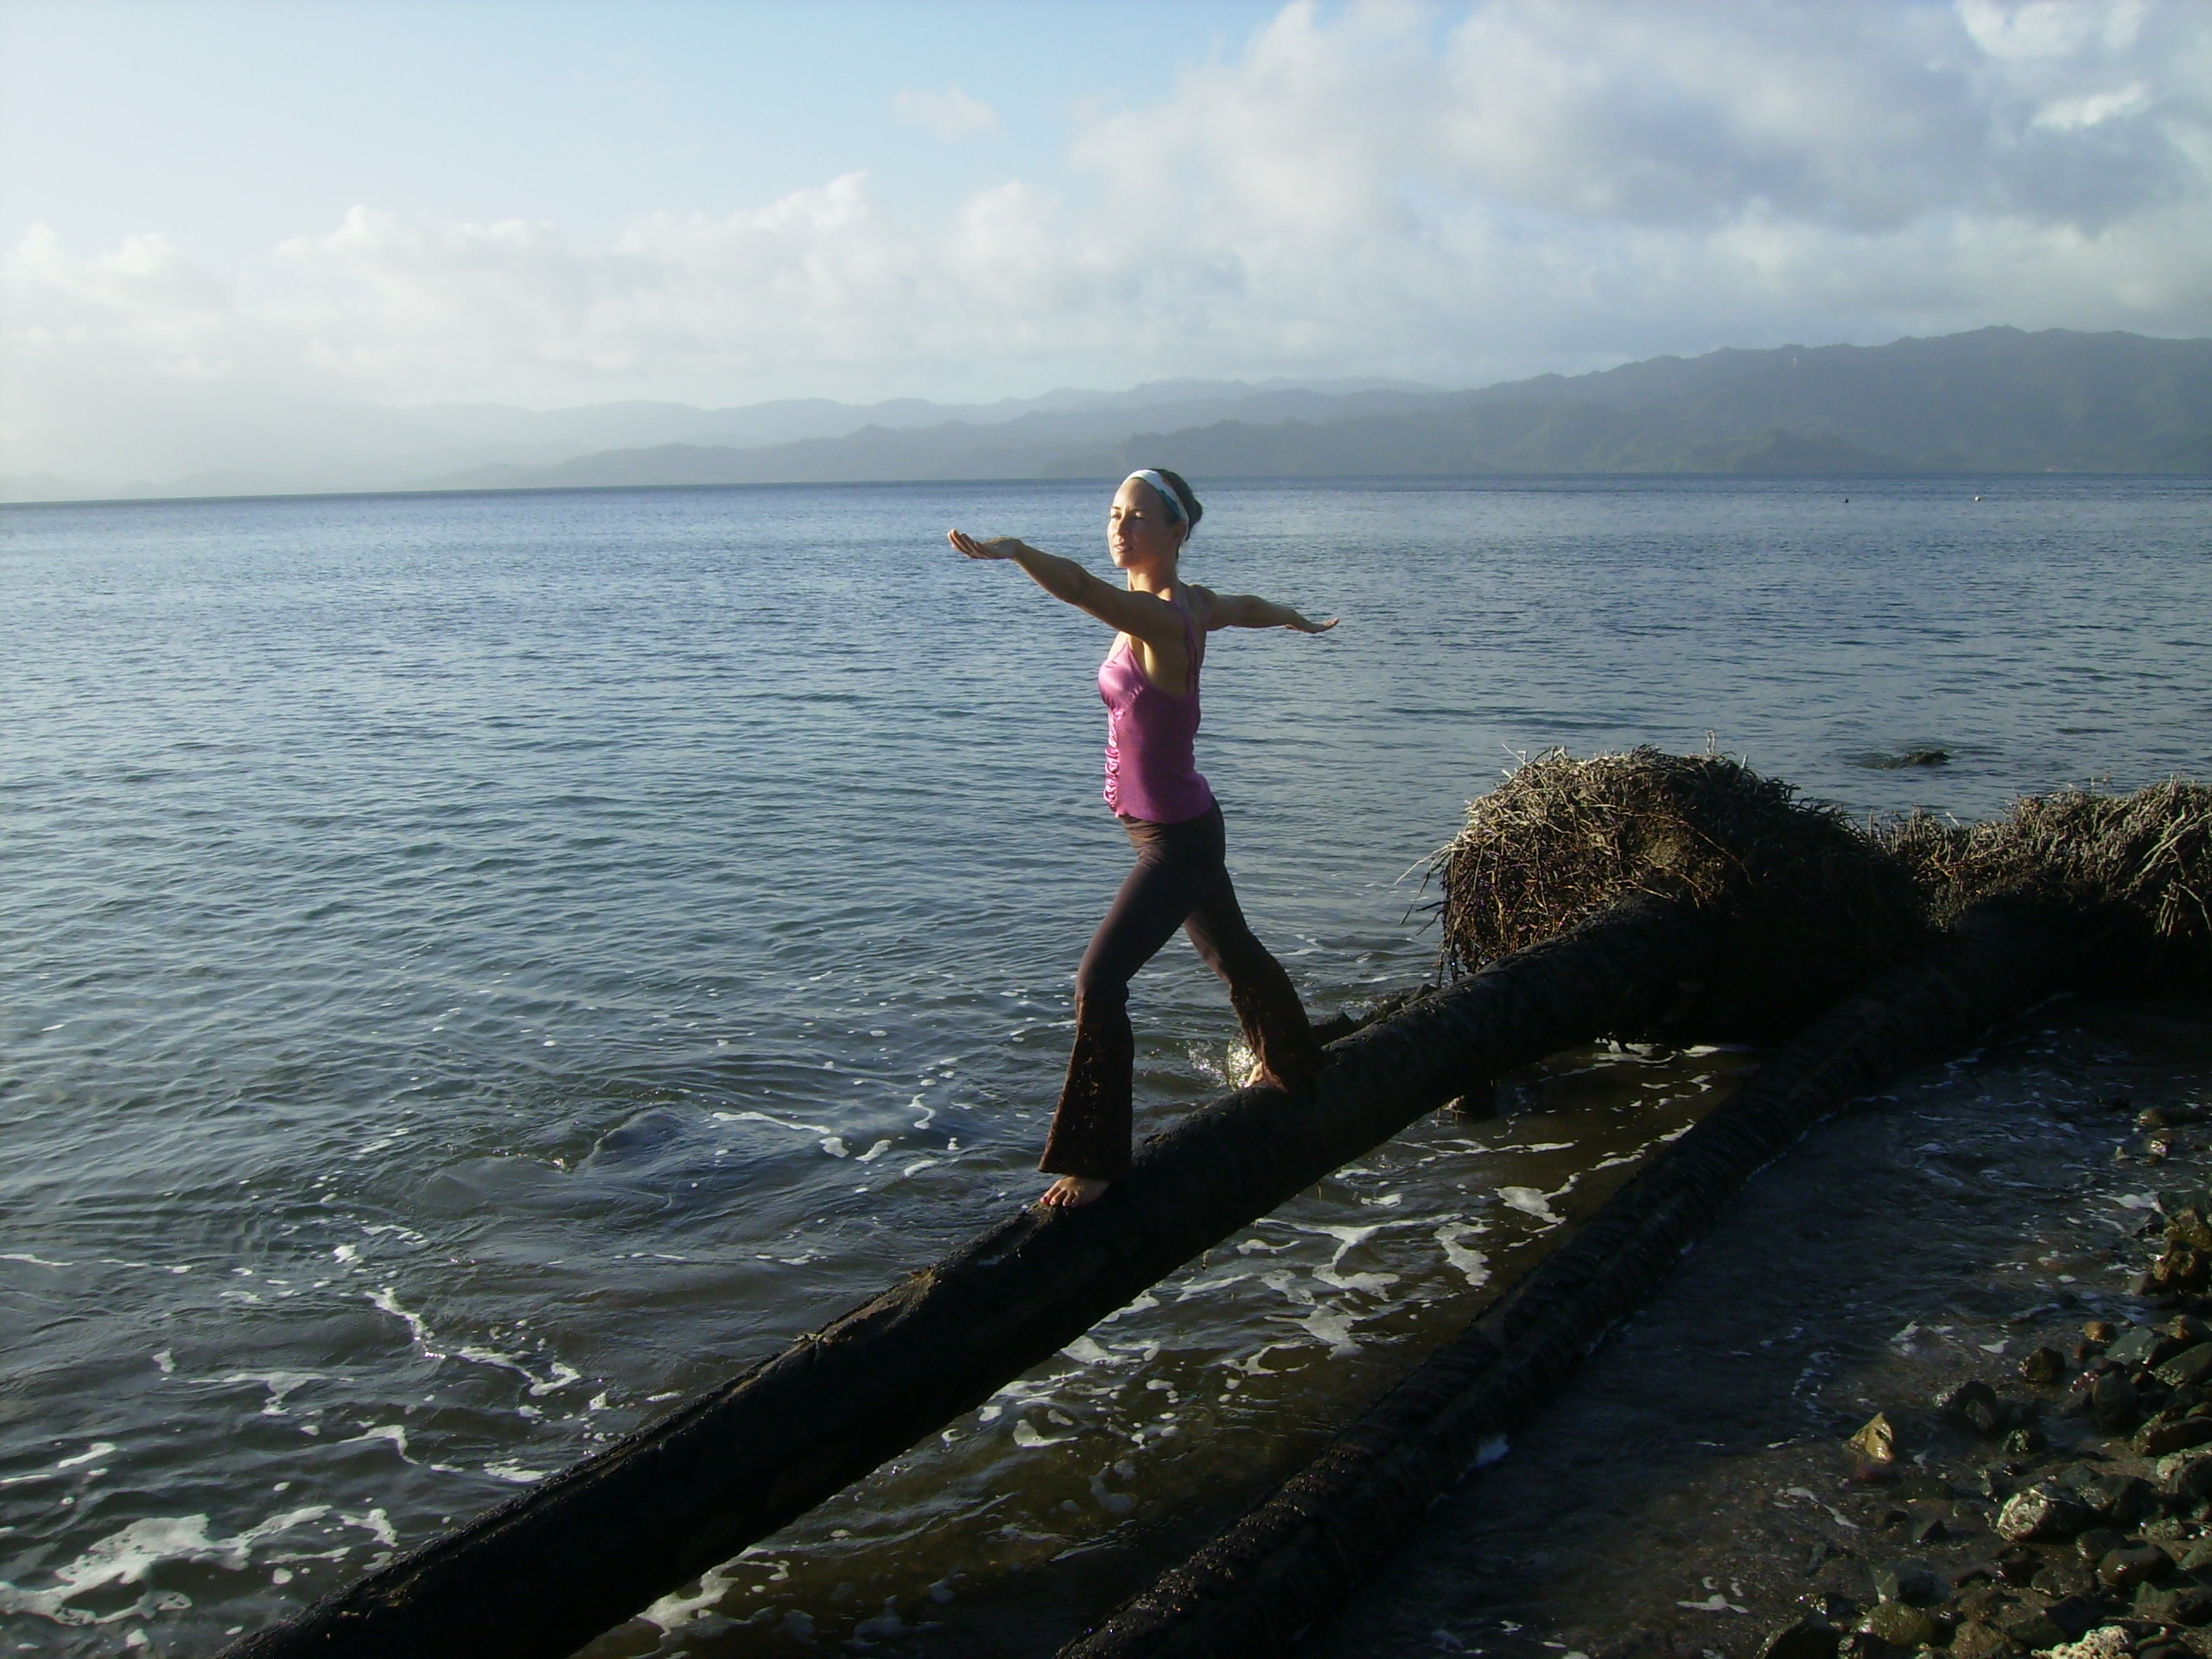 A woman practices yoga on a washed-up palm tree overlooking Savusavu bay